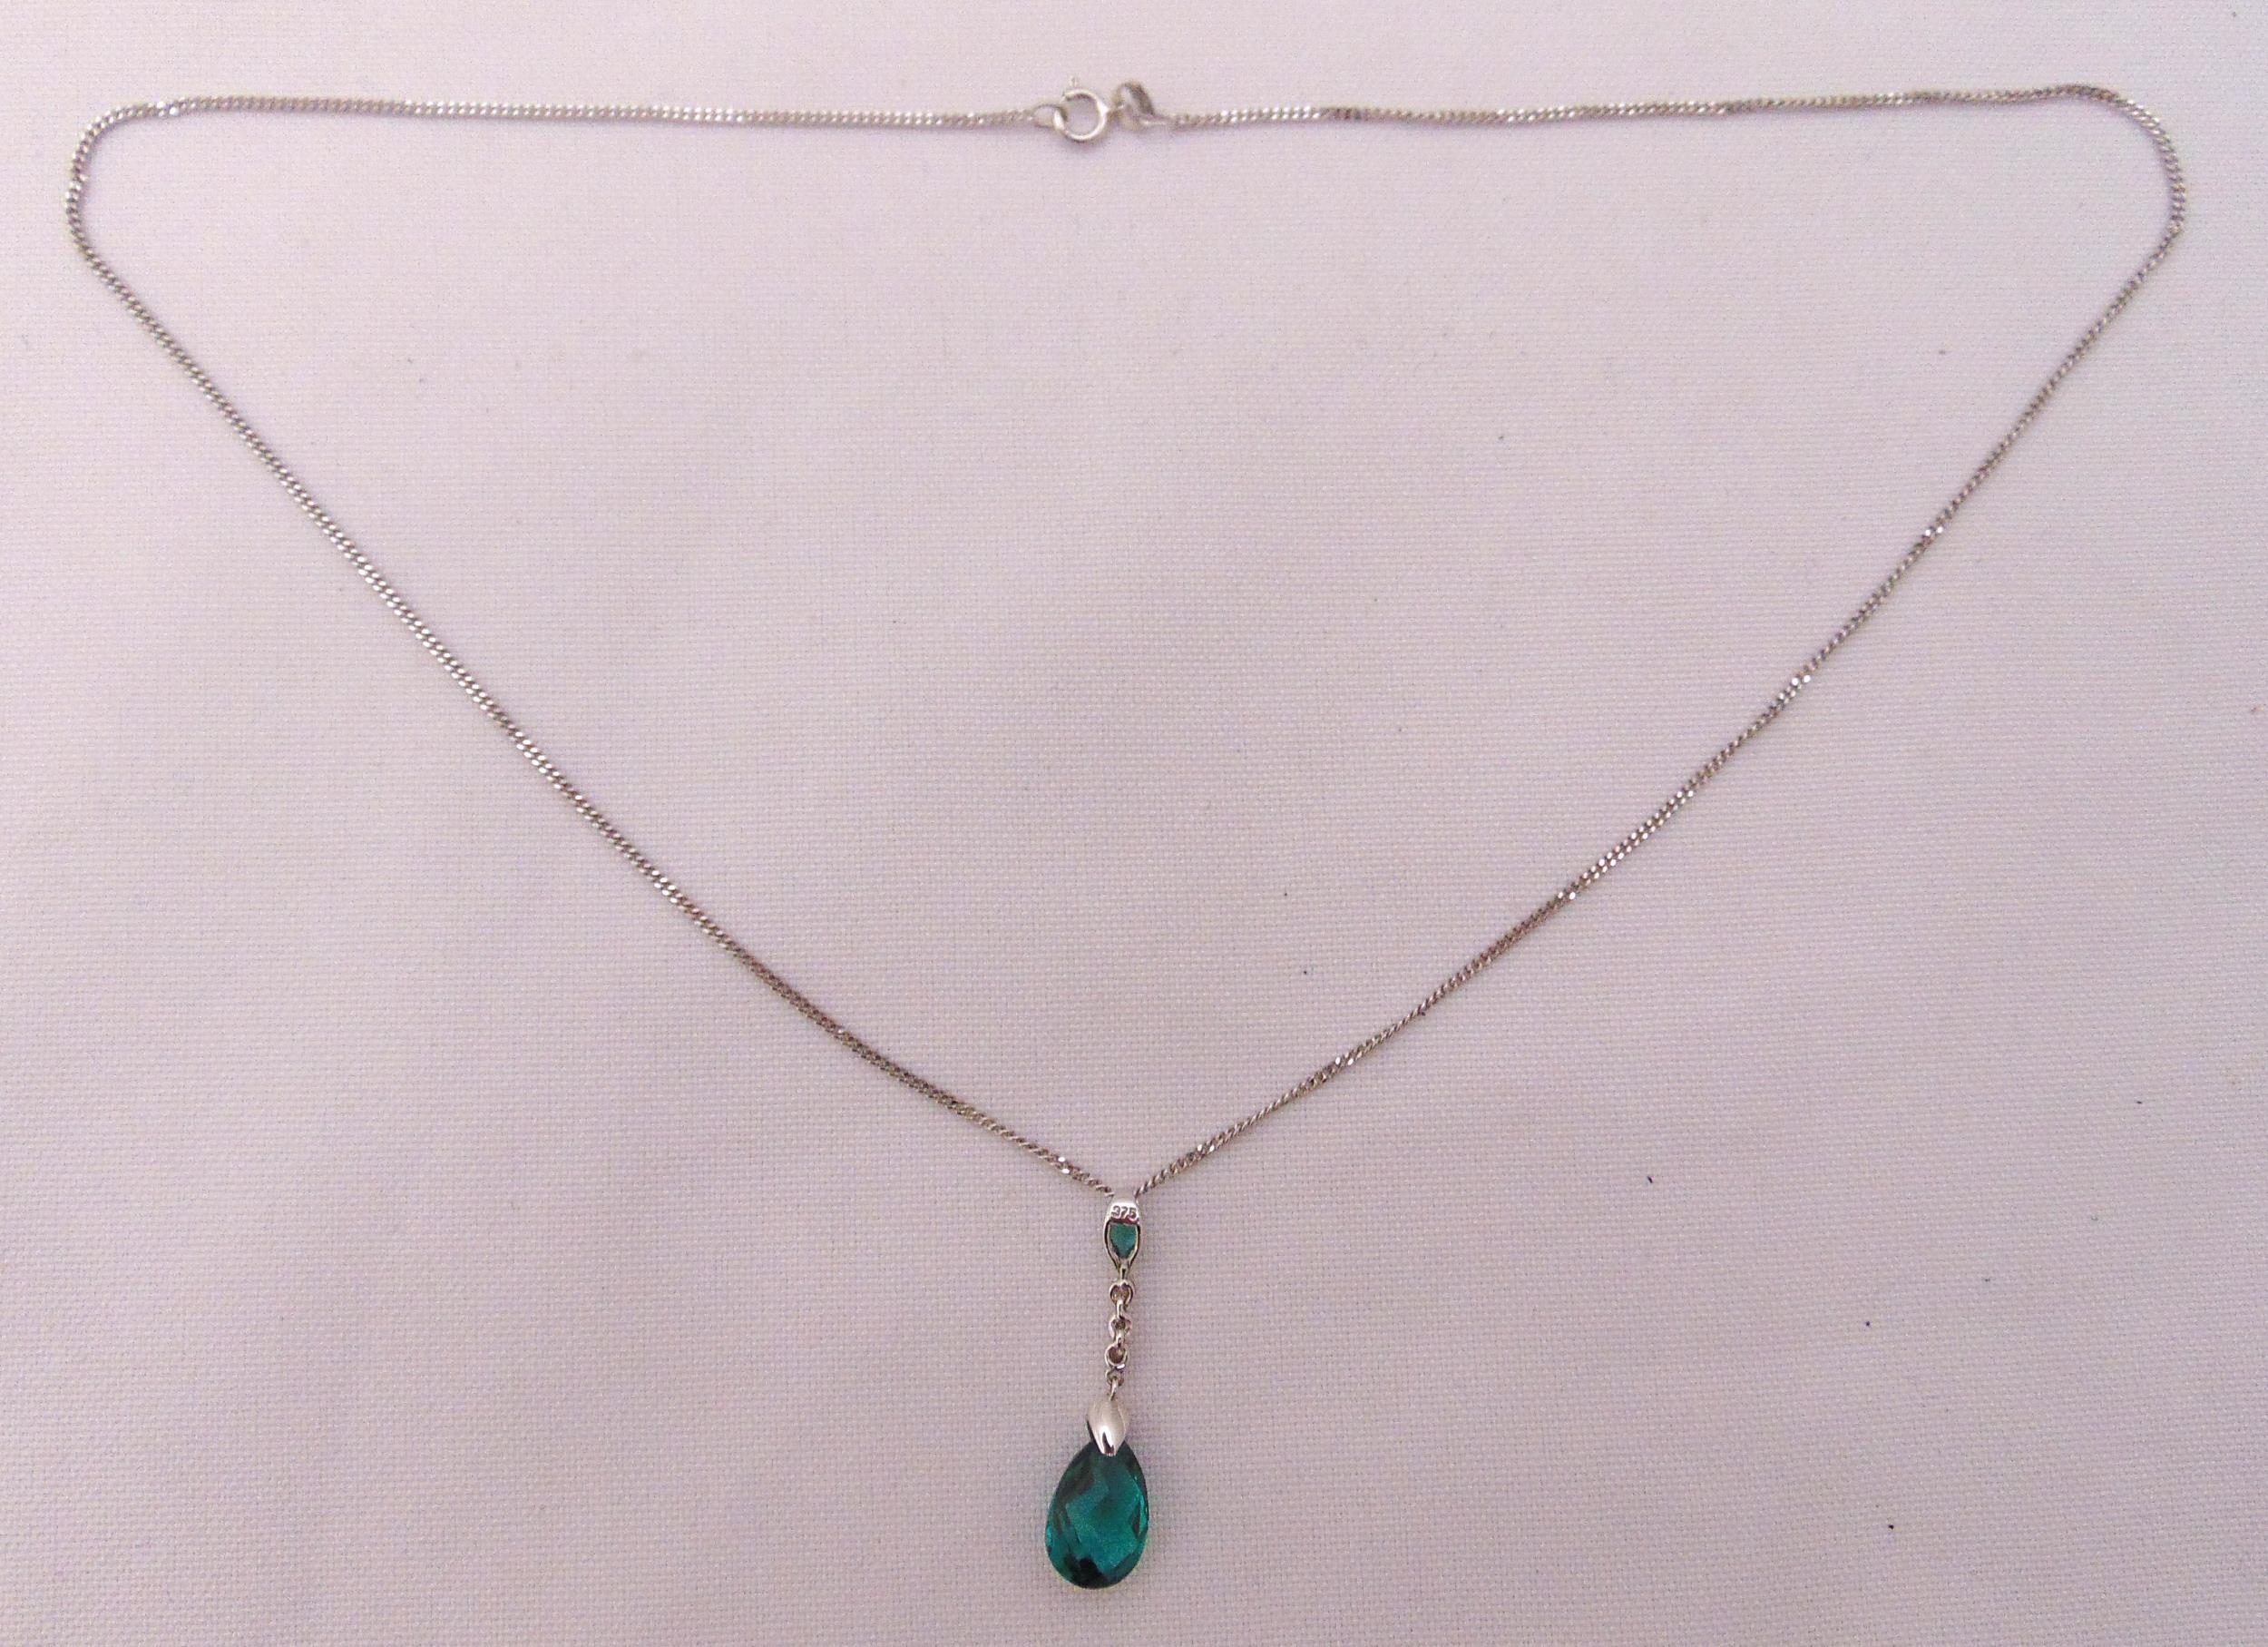 9ct white gold necklace with a coloured stone pendant, approx total weight 3.1g